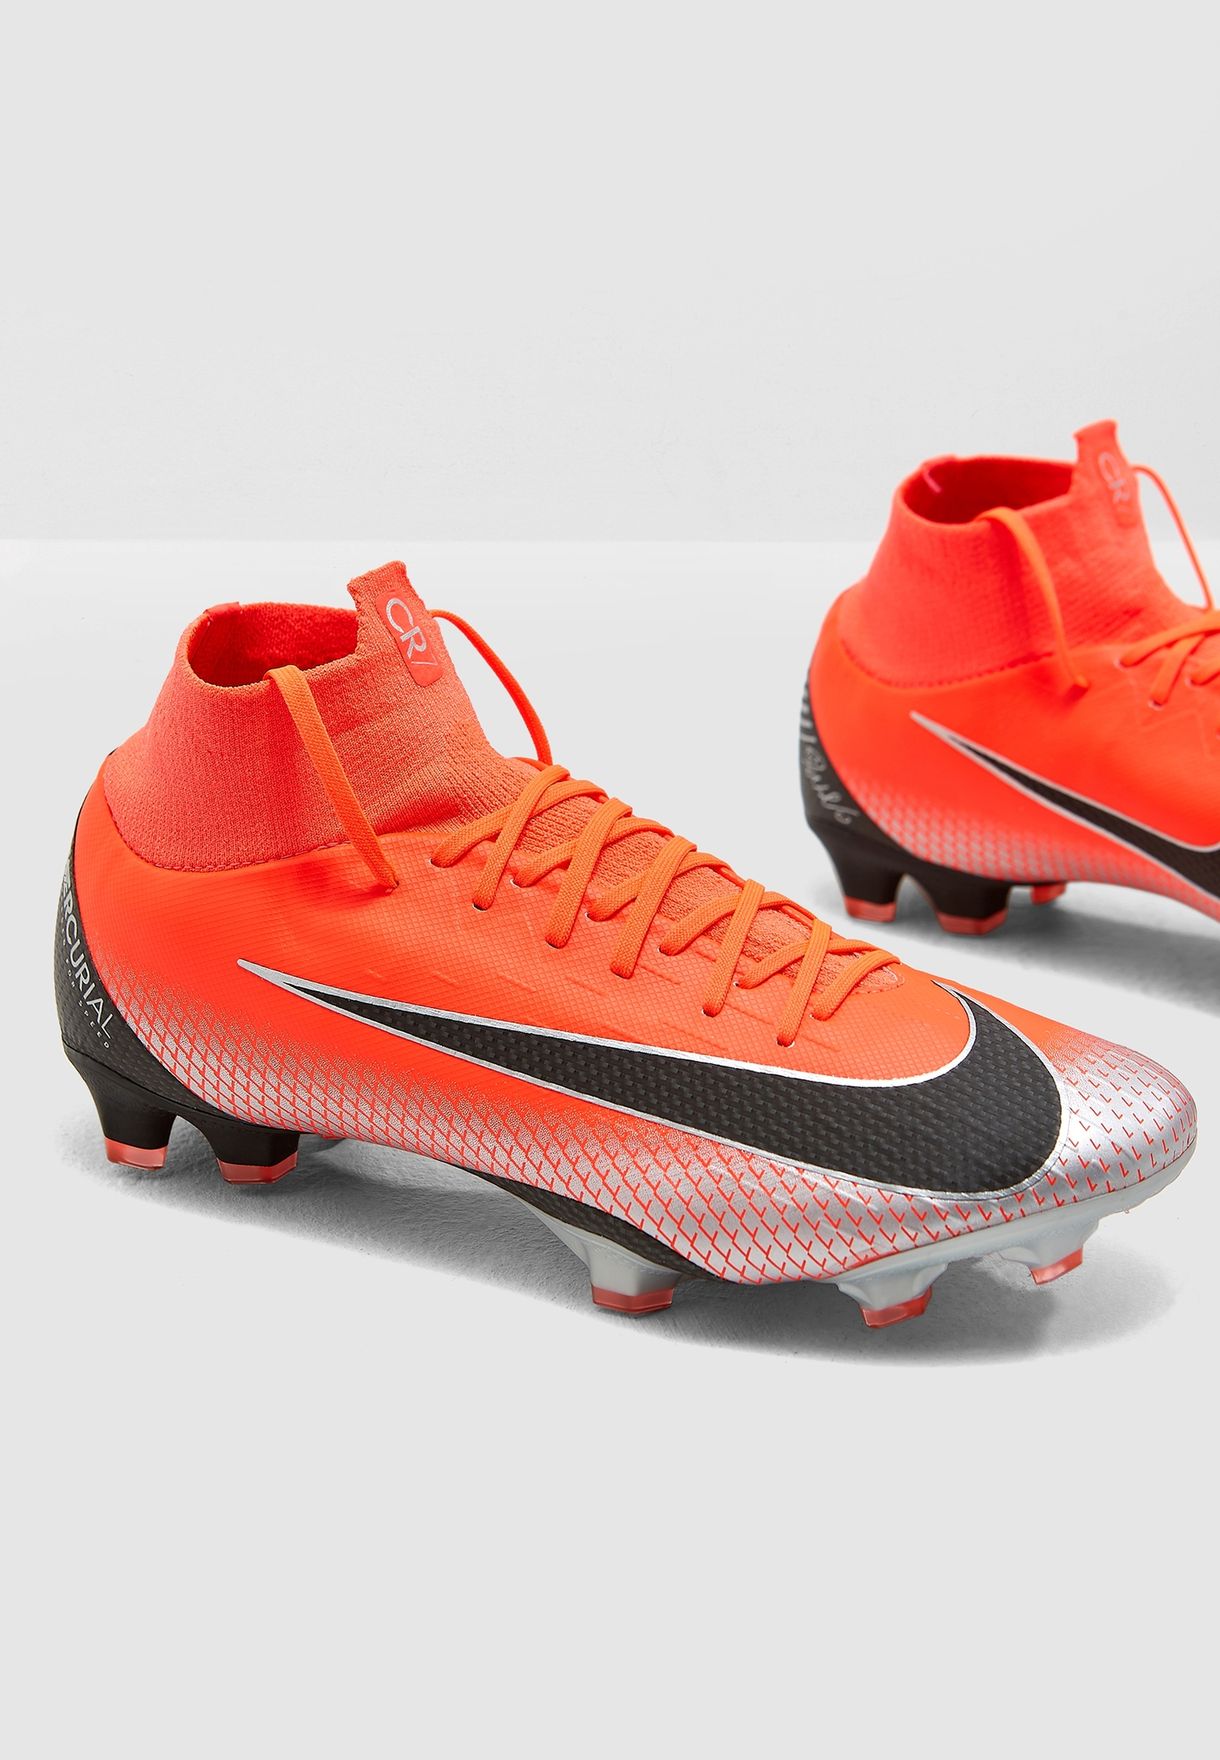 Nike Cr7 Mercurial Superfly Astro Turf Boots Bump